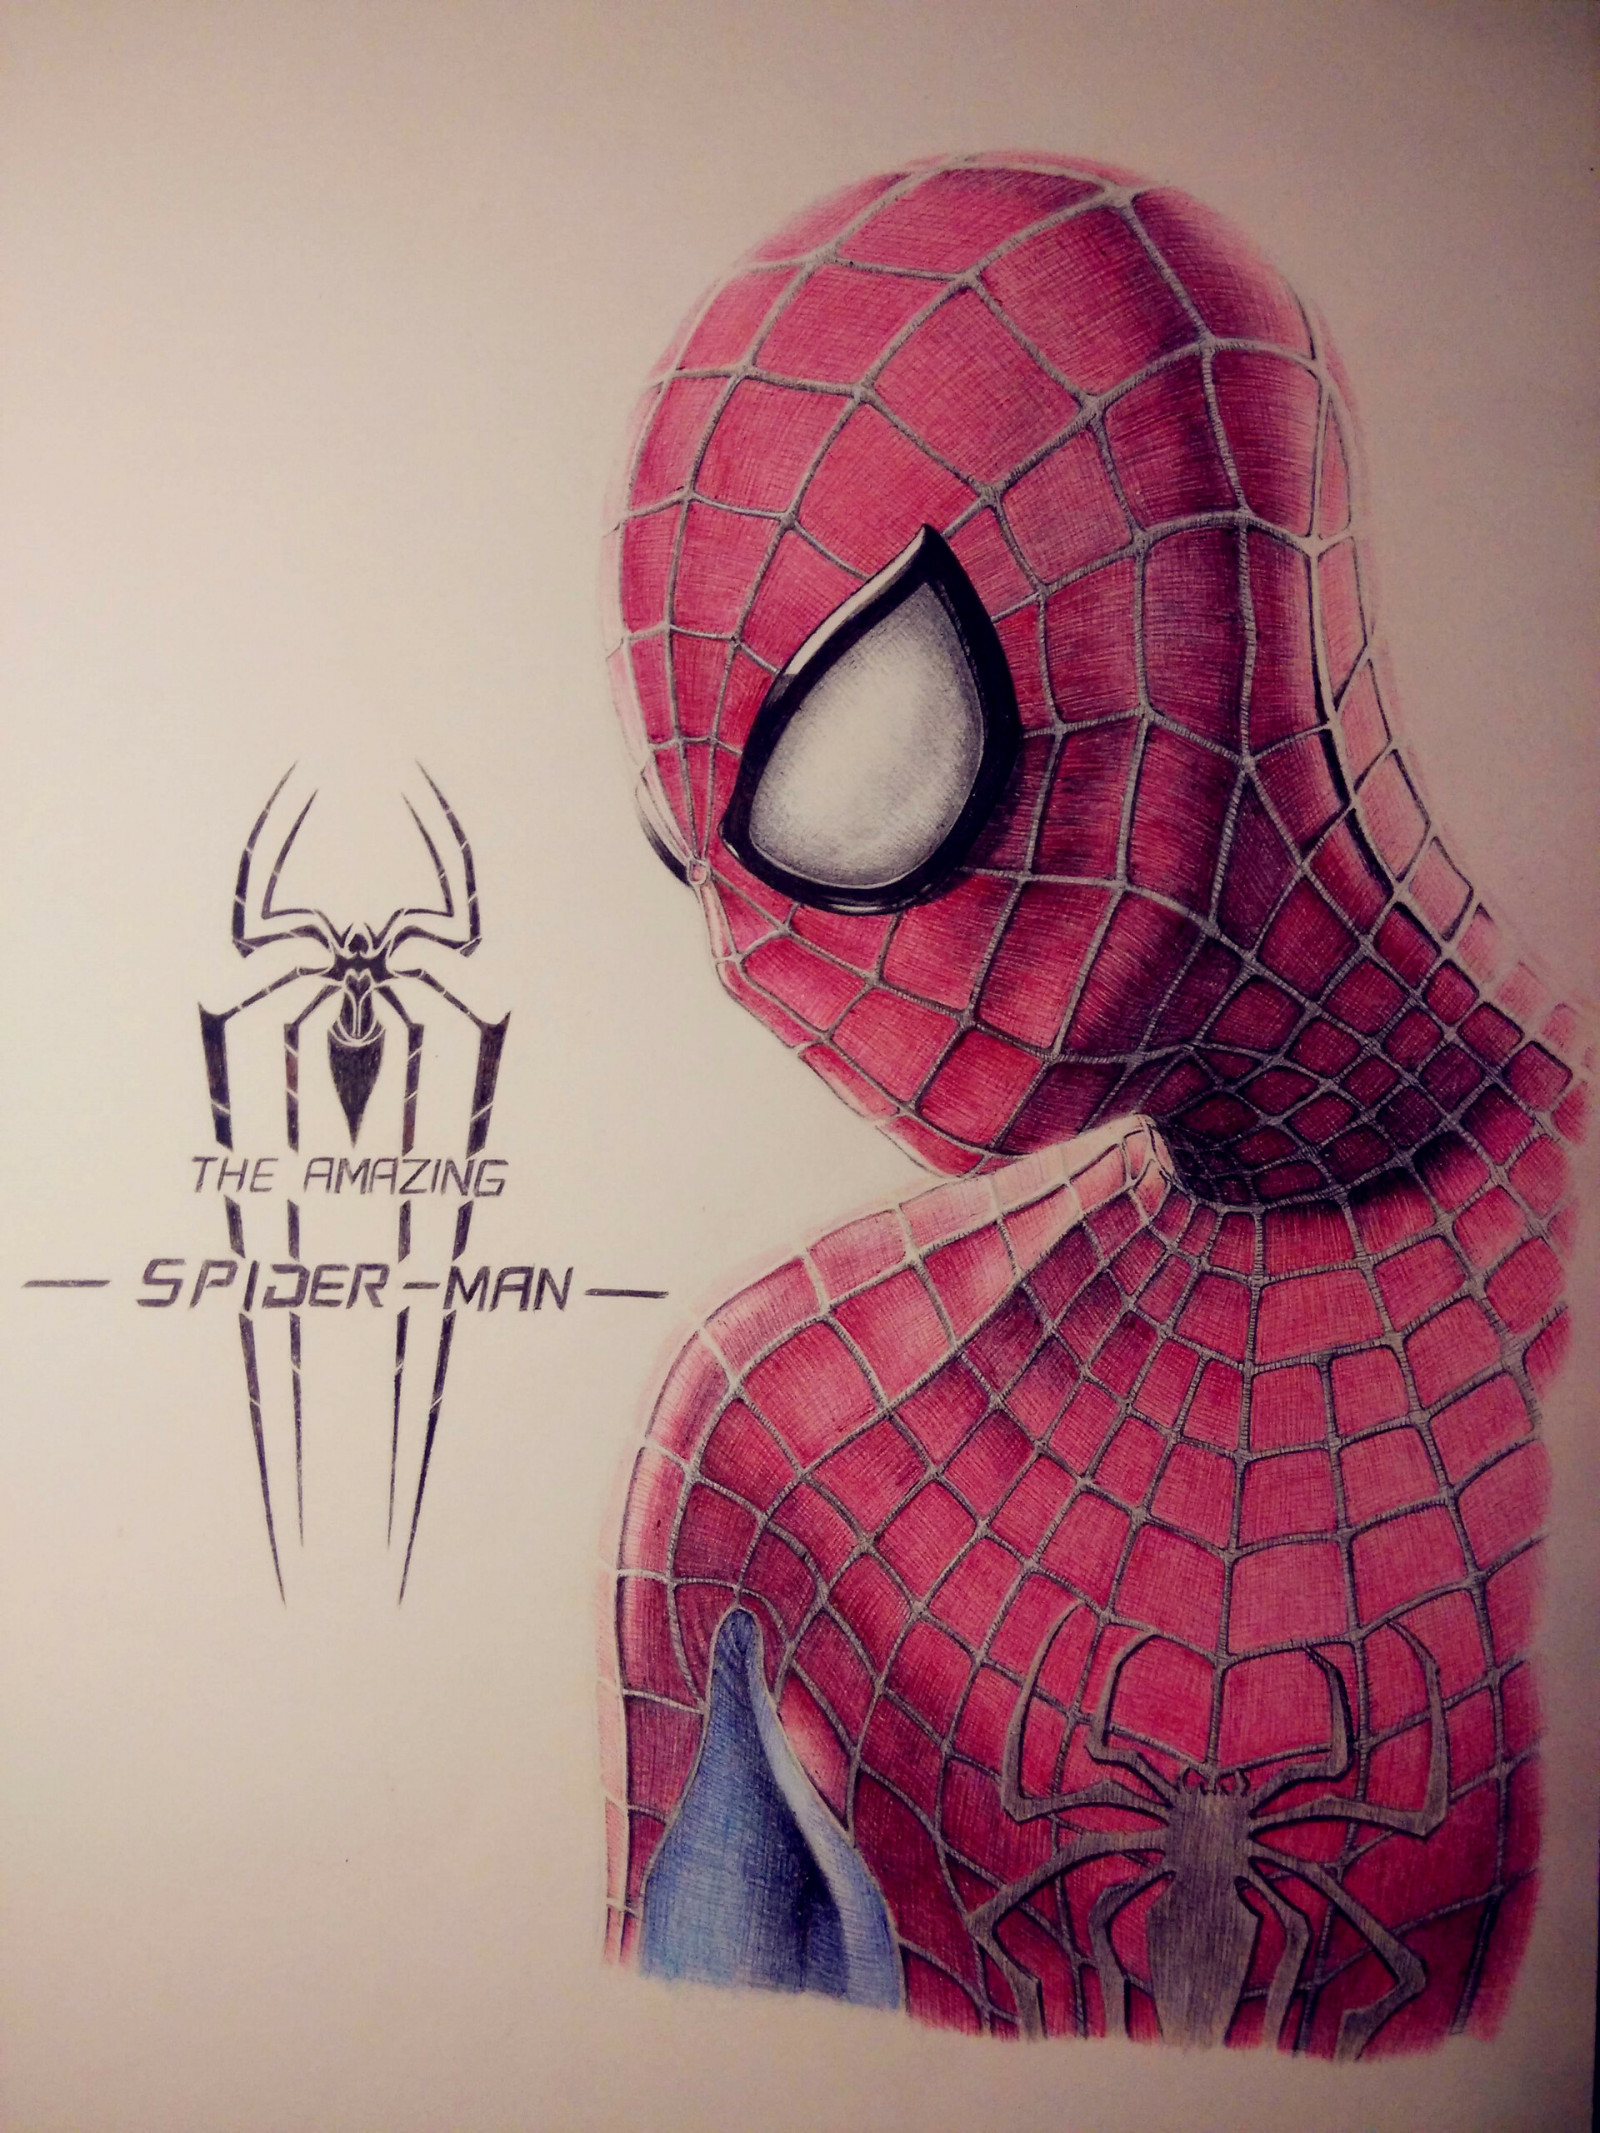 Wallpaper, Simac Nerbo, ArtStation, pencil drawing, fan art, digital painting, artwork, white background, red, The Amazing Spider Man 1920x2560